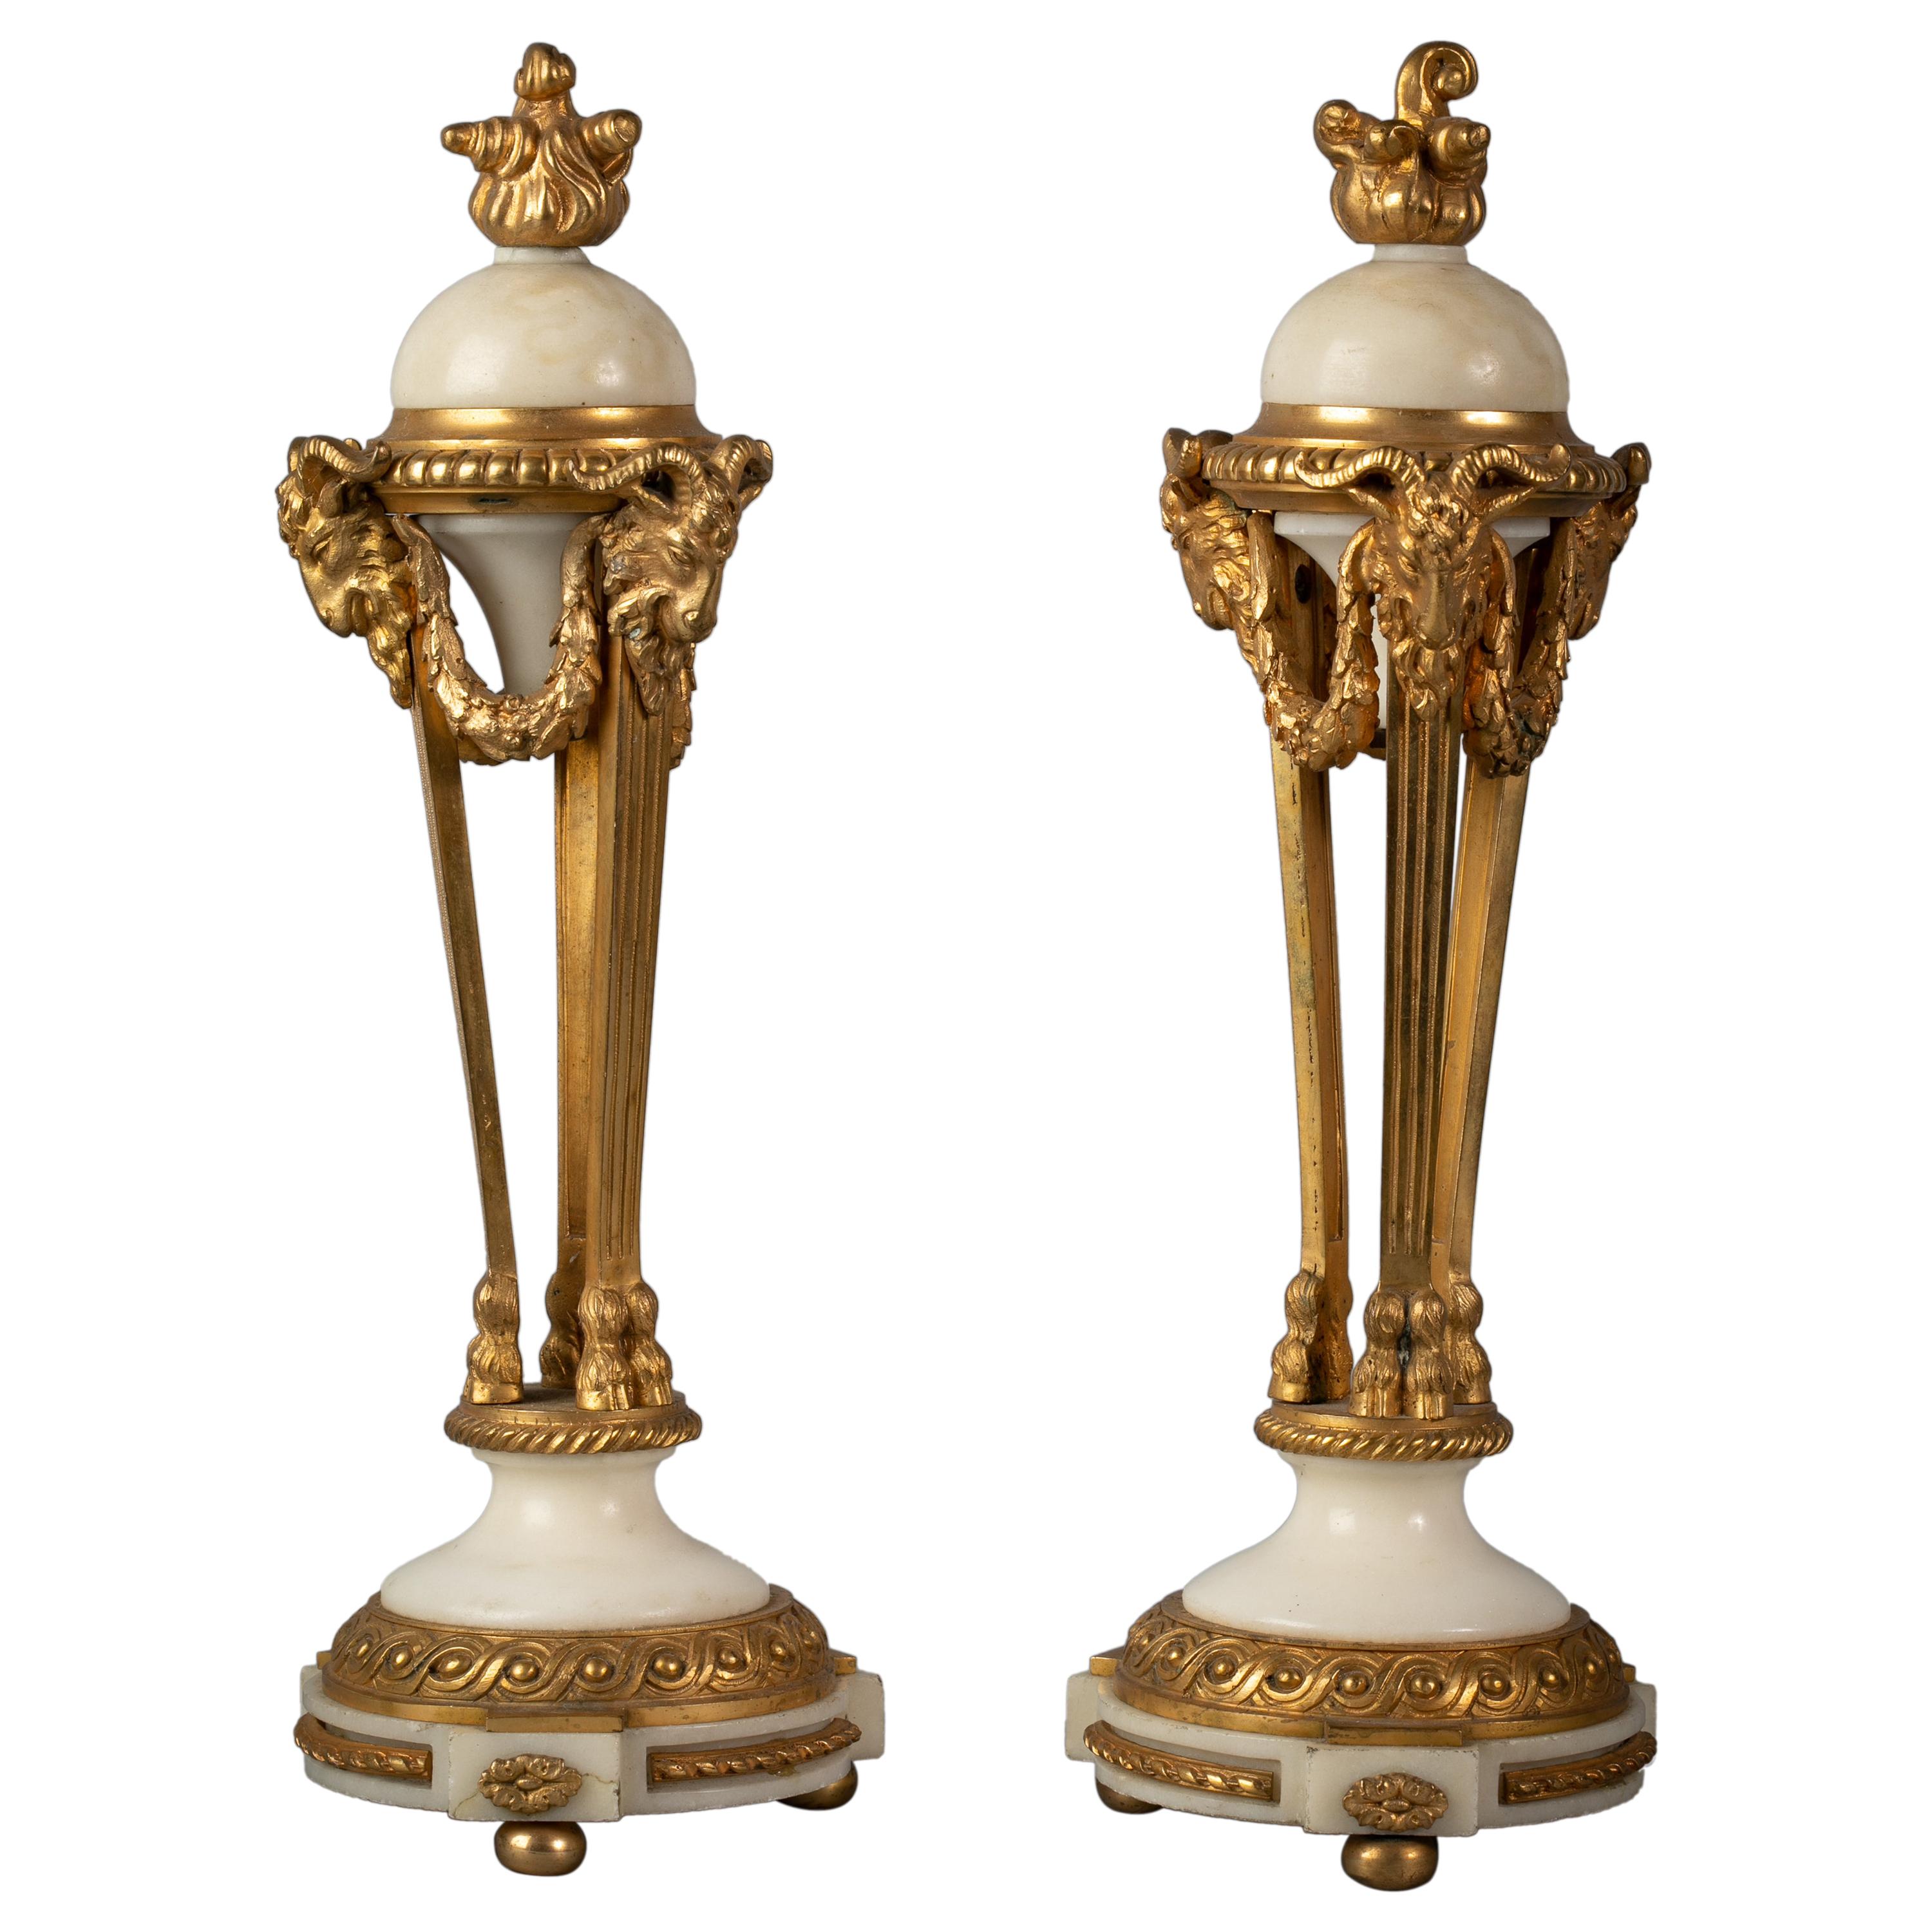 Pair of French Gilt Bronze and Marble Covered Urns, circa 1875